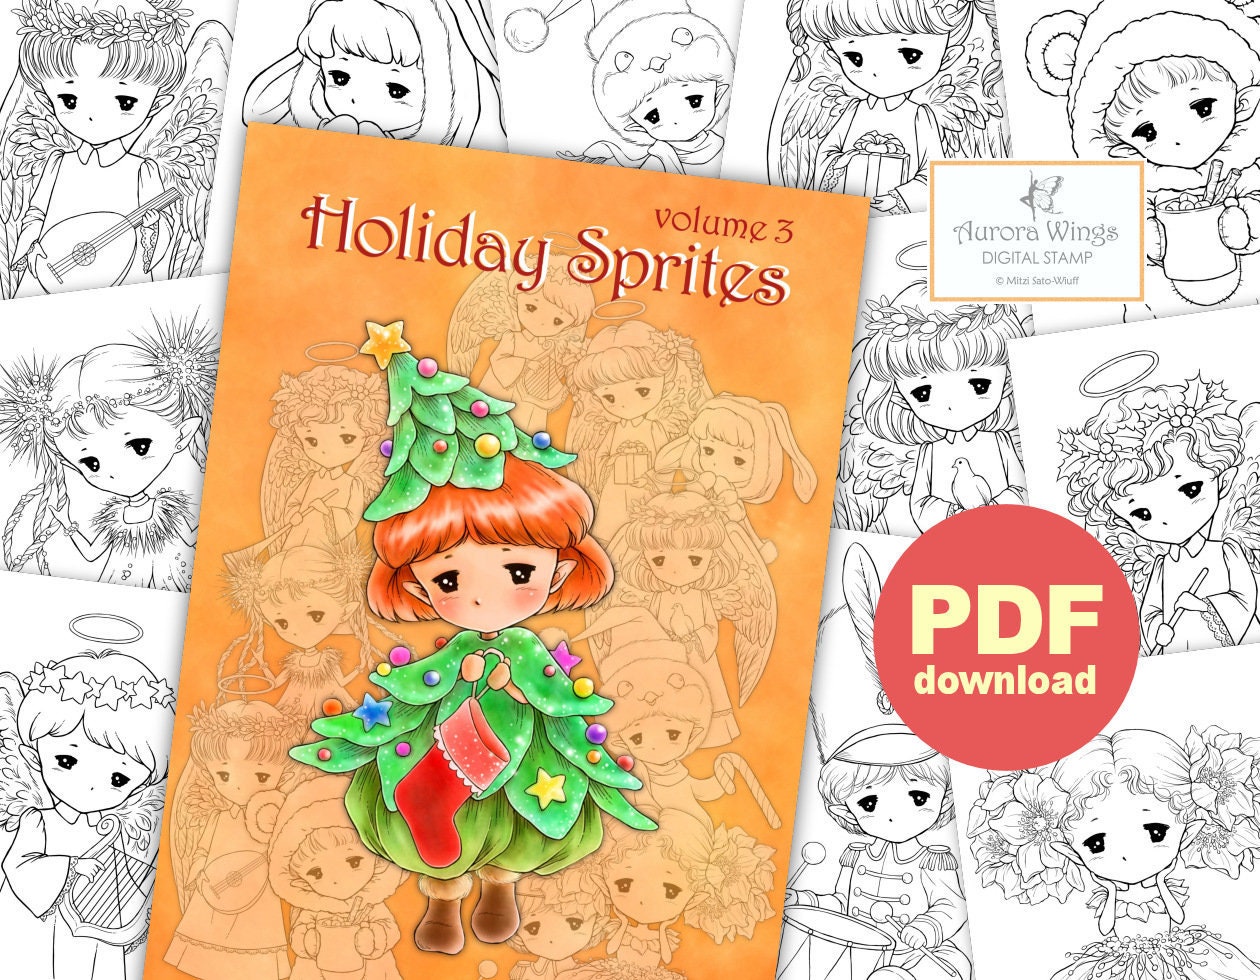 Christmas Coloring Books Bulk: Christmas Coloring Books Bulk, Christmas Coloring Book, Christmas Coloring Book for Toddlers. 50 Pages 8.5x 11 [Book]